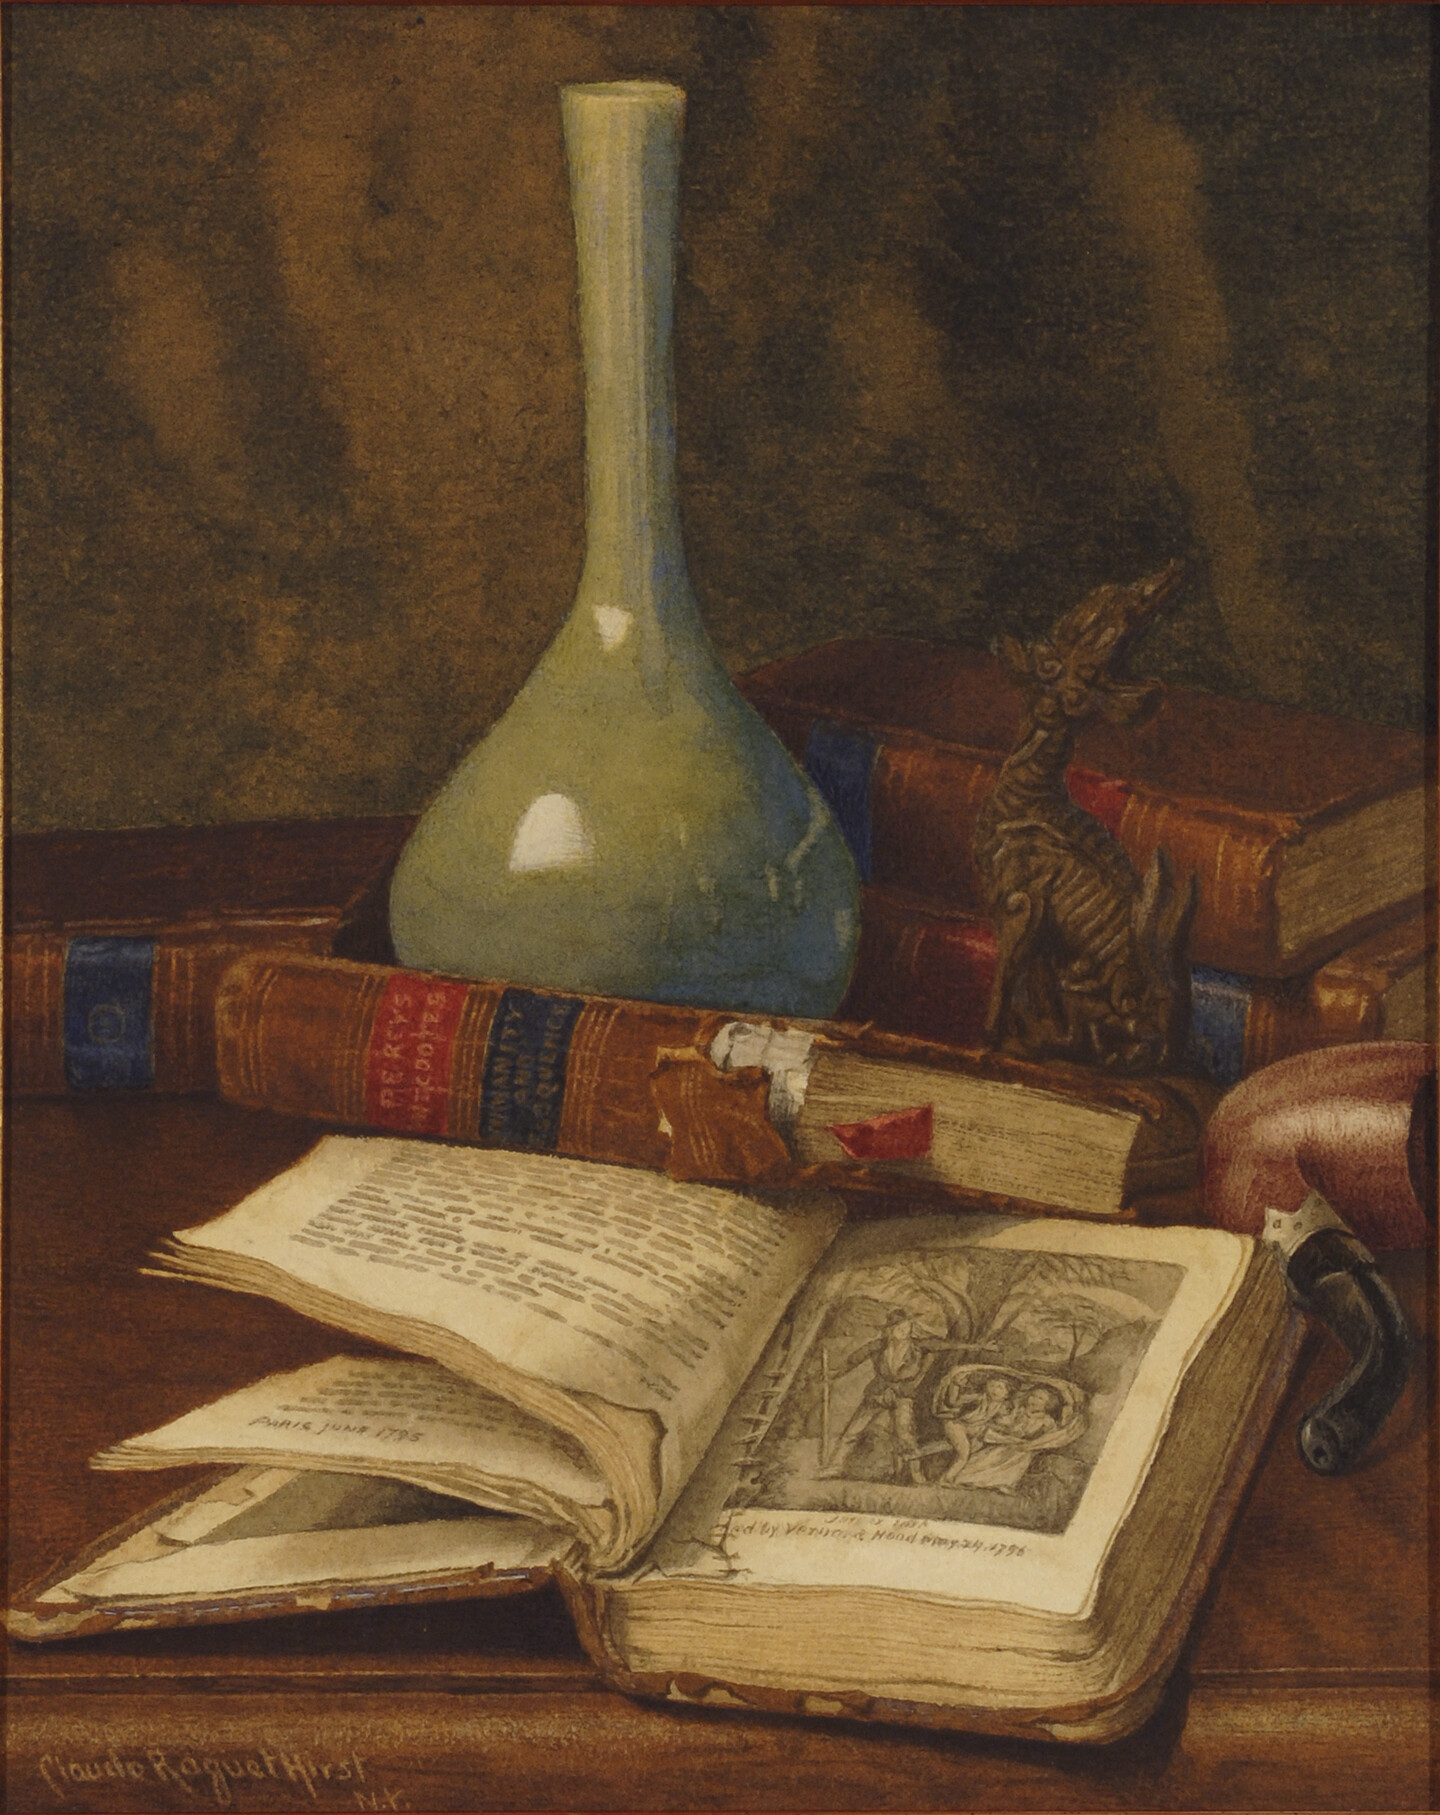 A cluttered tabletop is strewn with books, a small sculpture, a vase, and a tobacco pipe. At the center, there is a book flipped open to an illustration. Parts of the pages are torn.